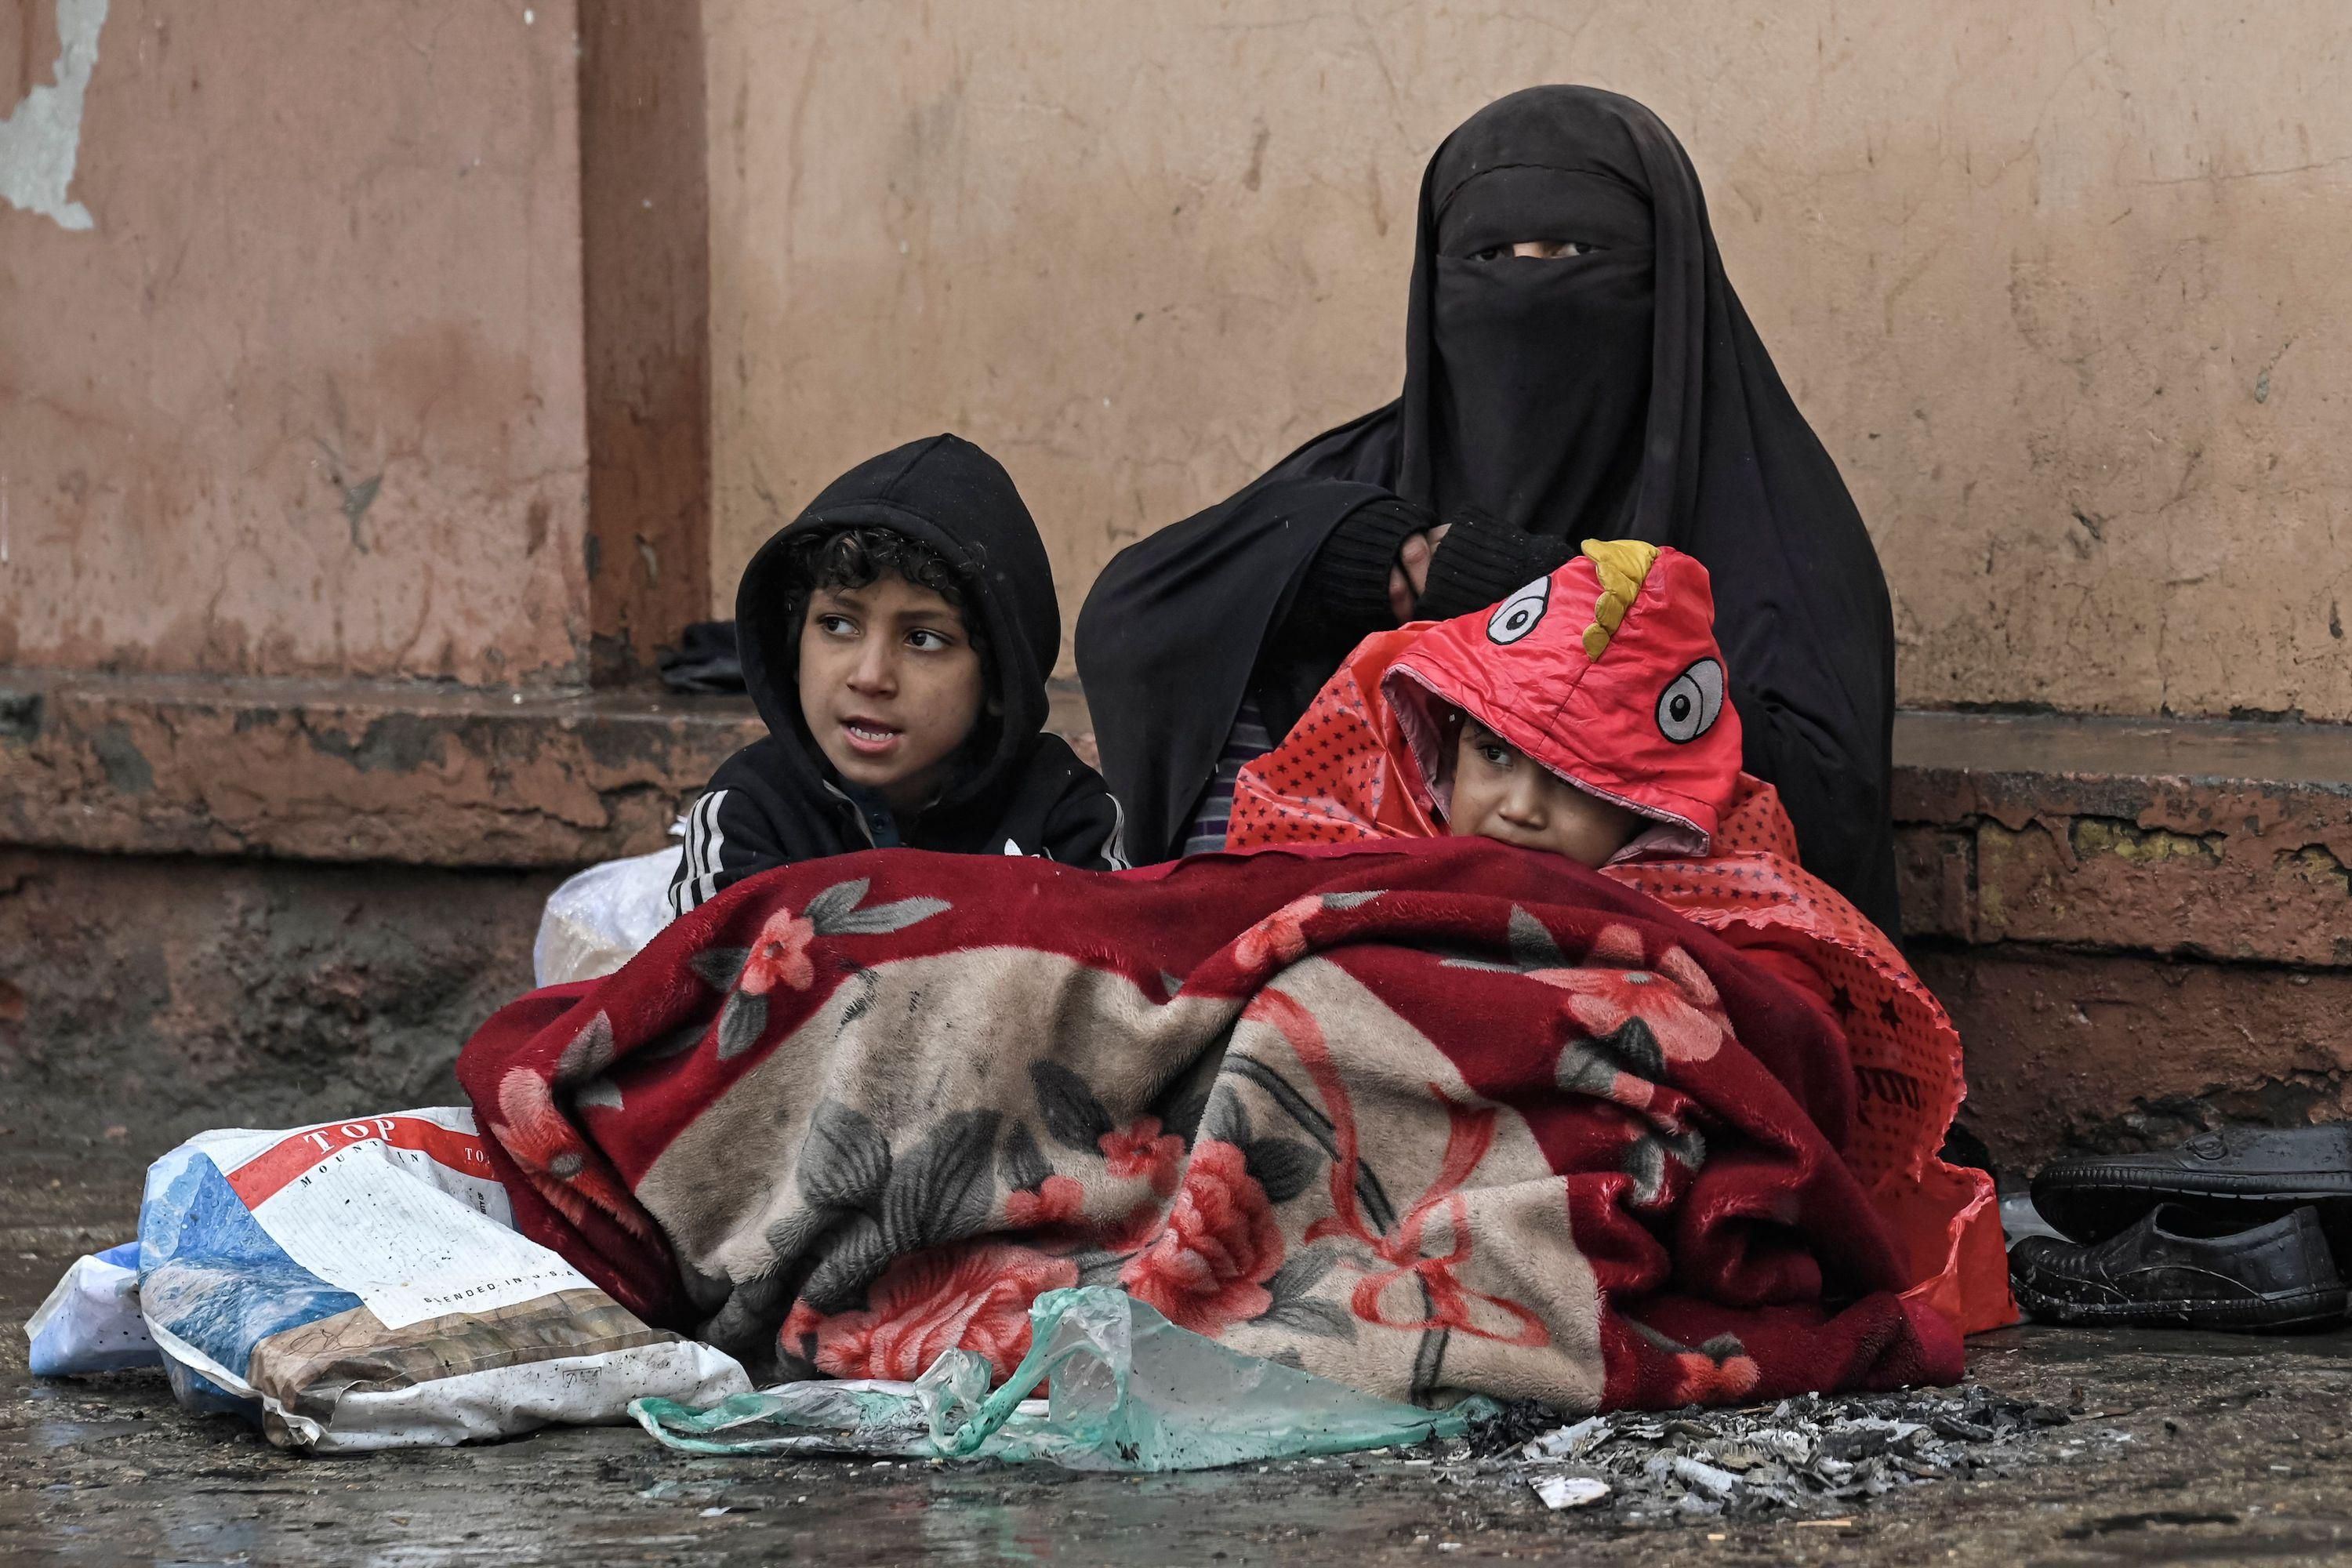 A burqa-clad Afghan woman sits next to a boundary wall with her children as she seeks alms from people passing by along a road in Kabul on January 8, 2022